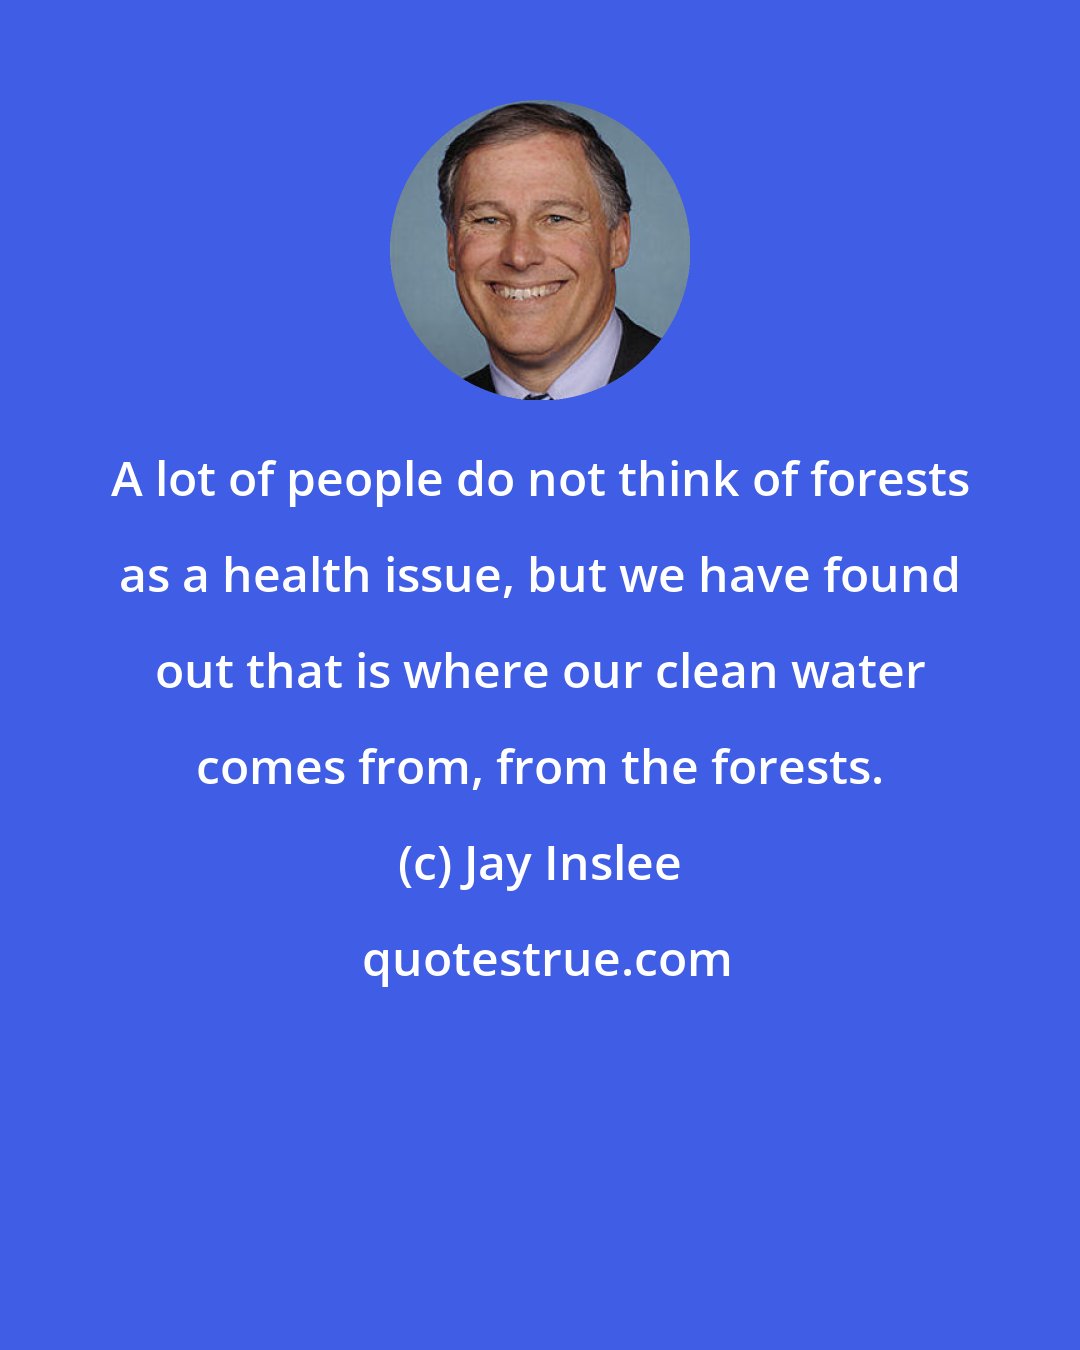 Jay Inslee: A lot of people do not think of forests as a health issue, but we have found out that is where our clean water comes from, from the forests.